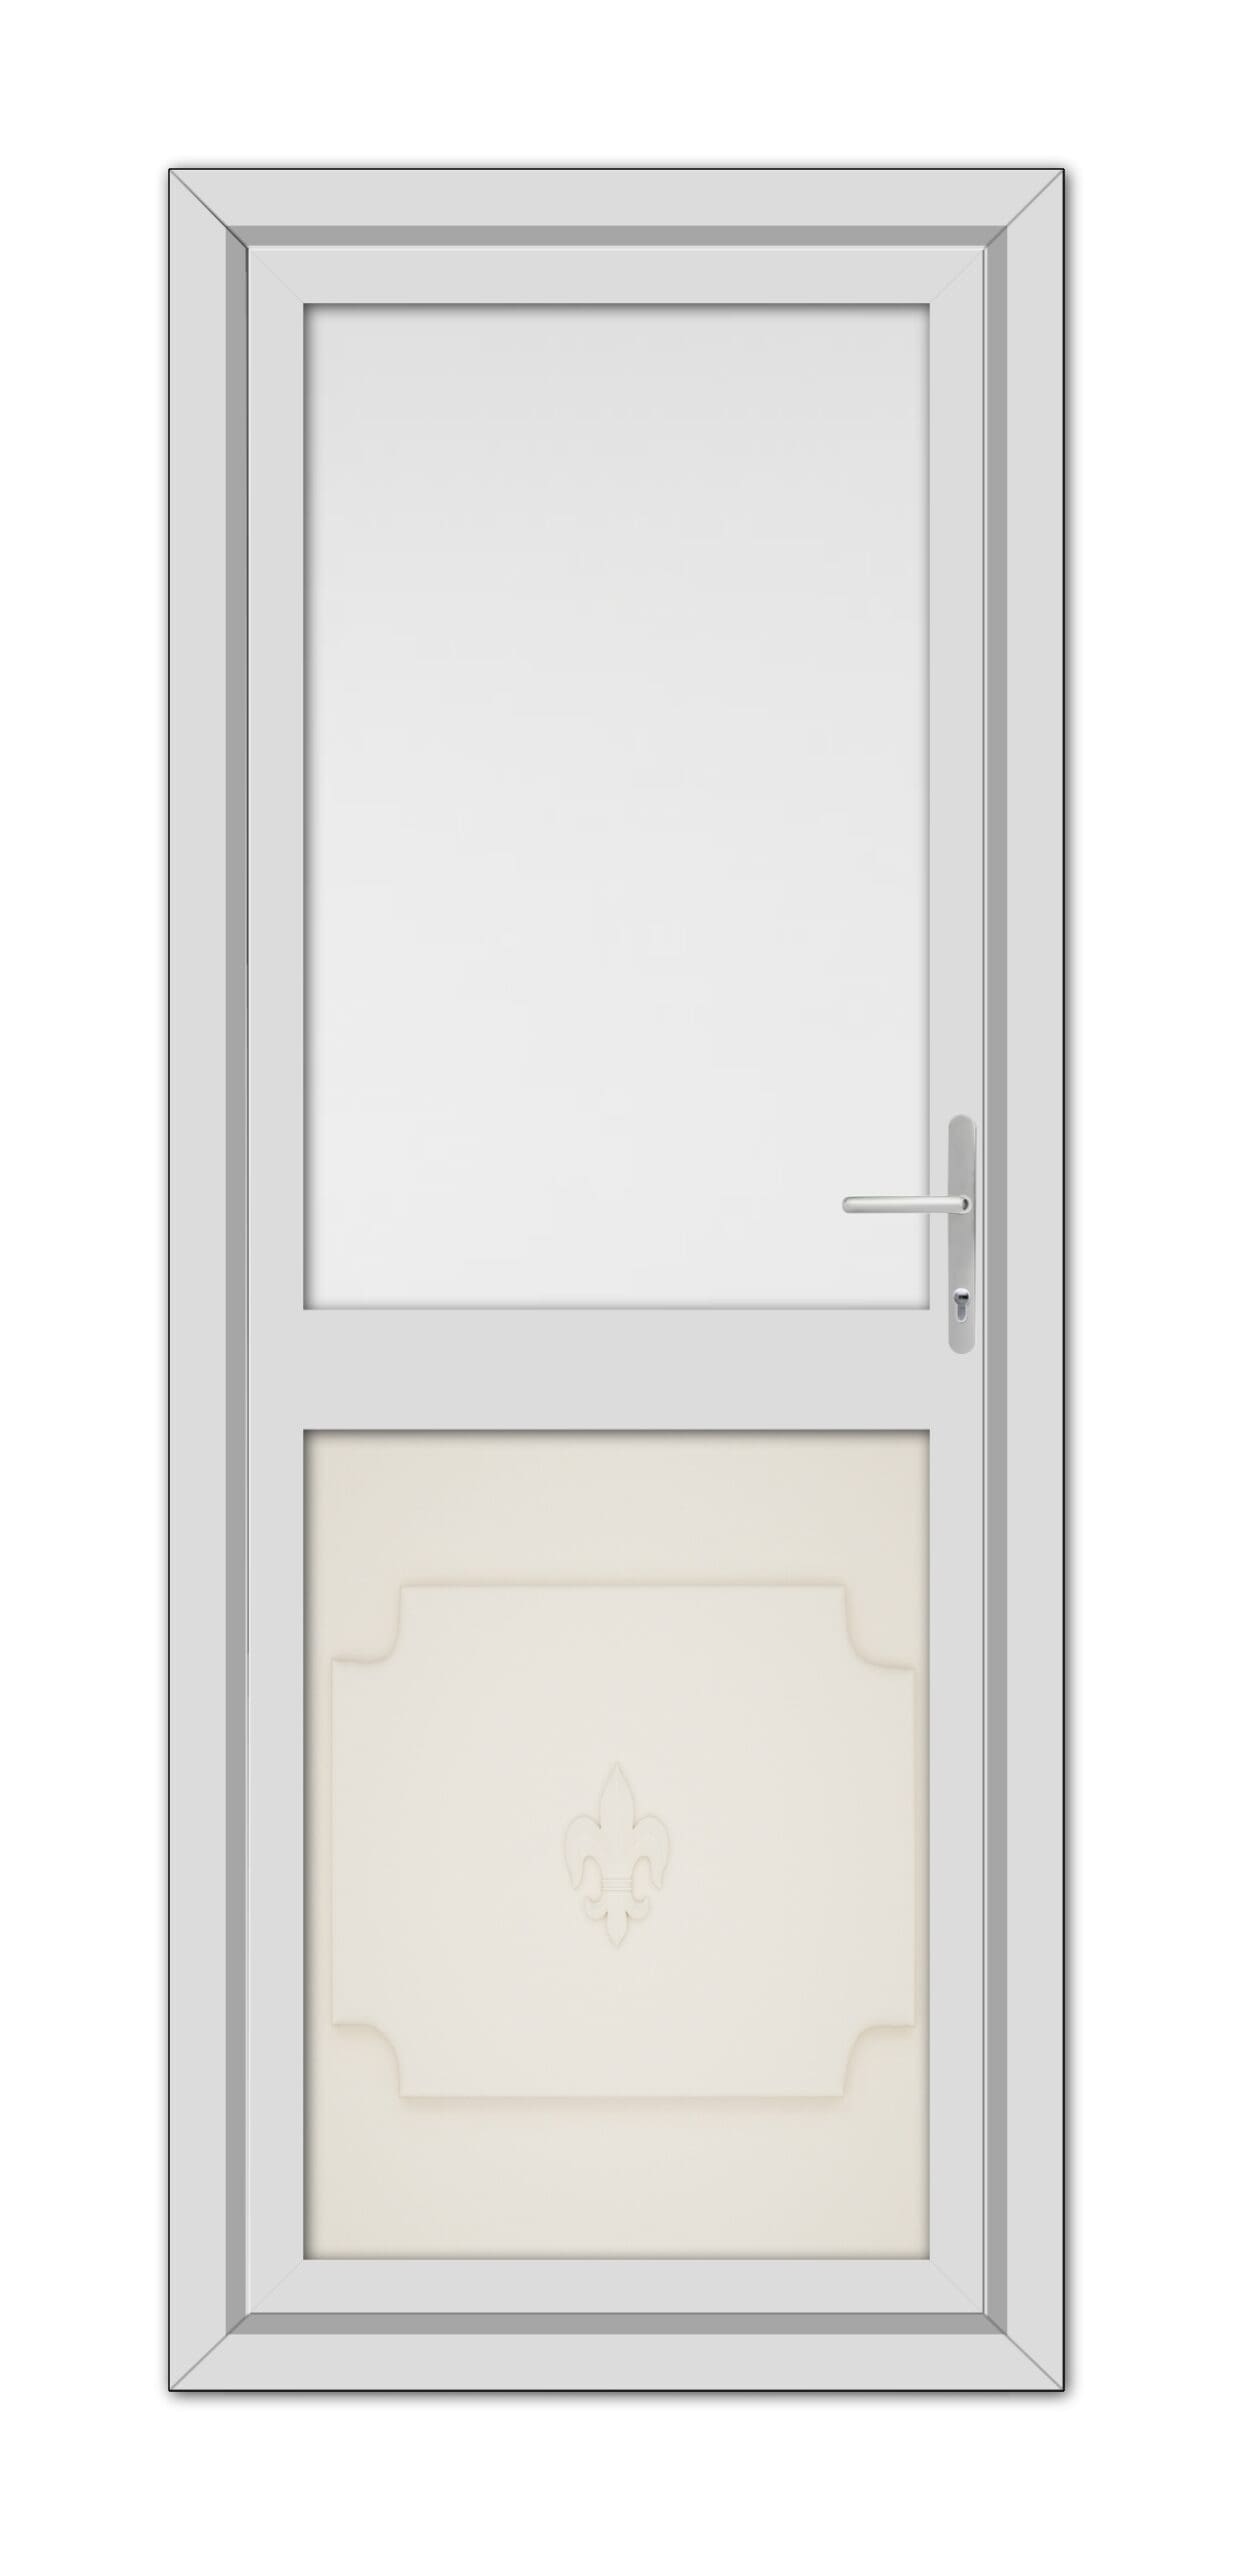 A Cream Abbey Half uPVC Back Door with a top window, a panel with decorative relief below it, and a metallic handle on the right, set within a simple frame.